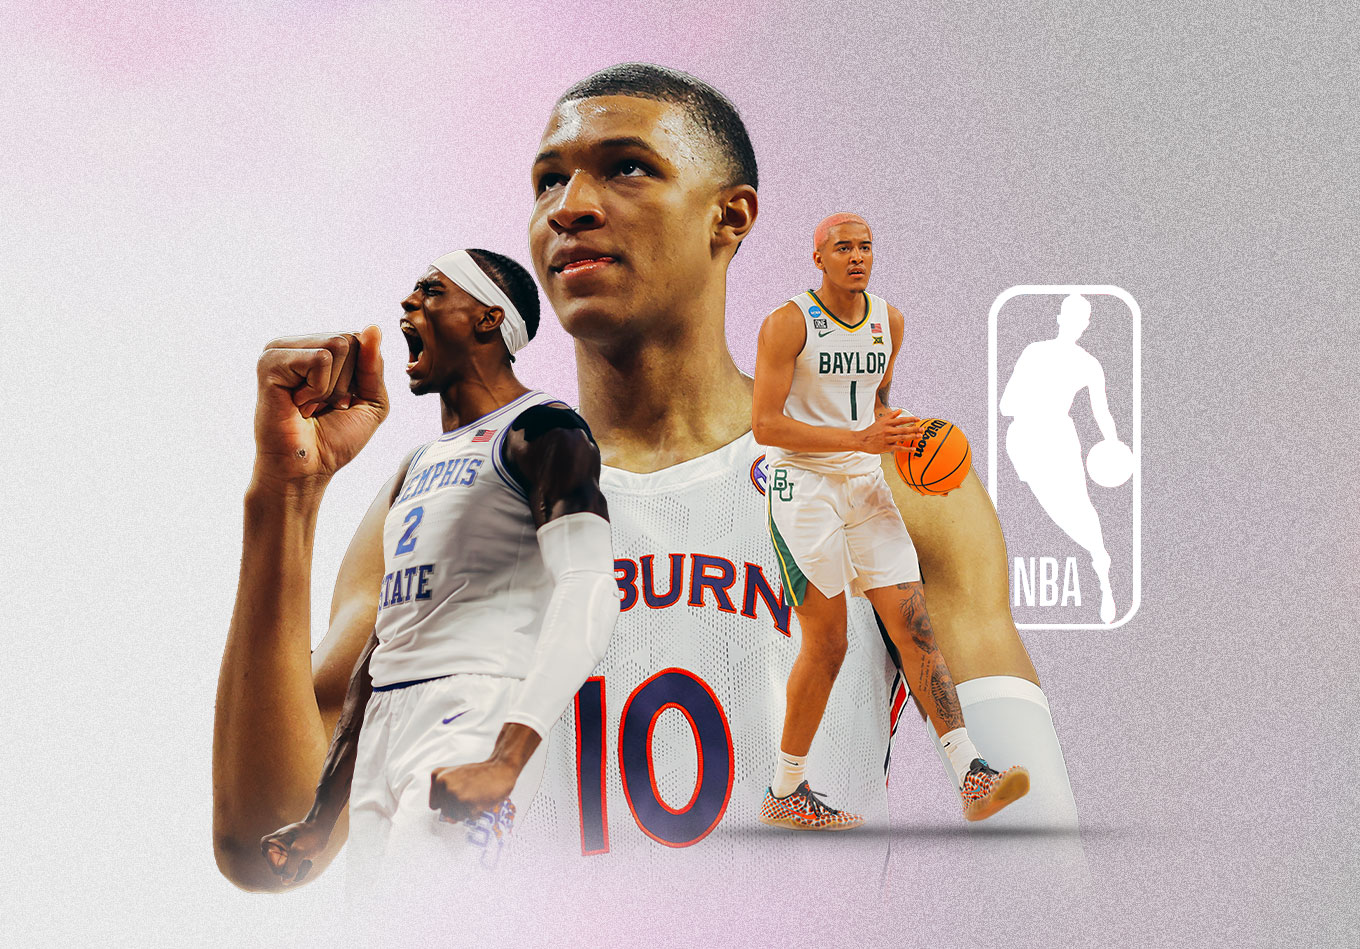 Futures Report: Our Model’s Player Rankings and Comparisons for the 2022 NBA Draft